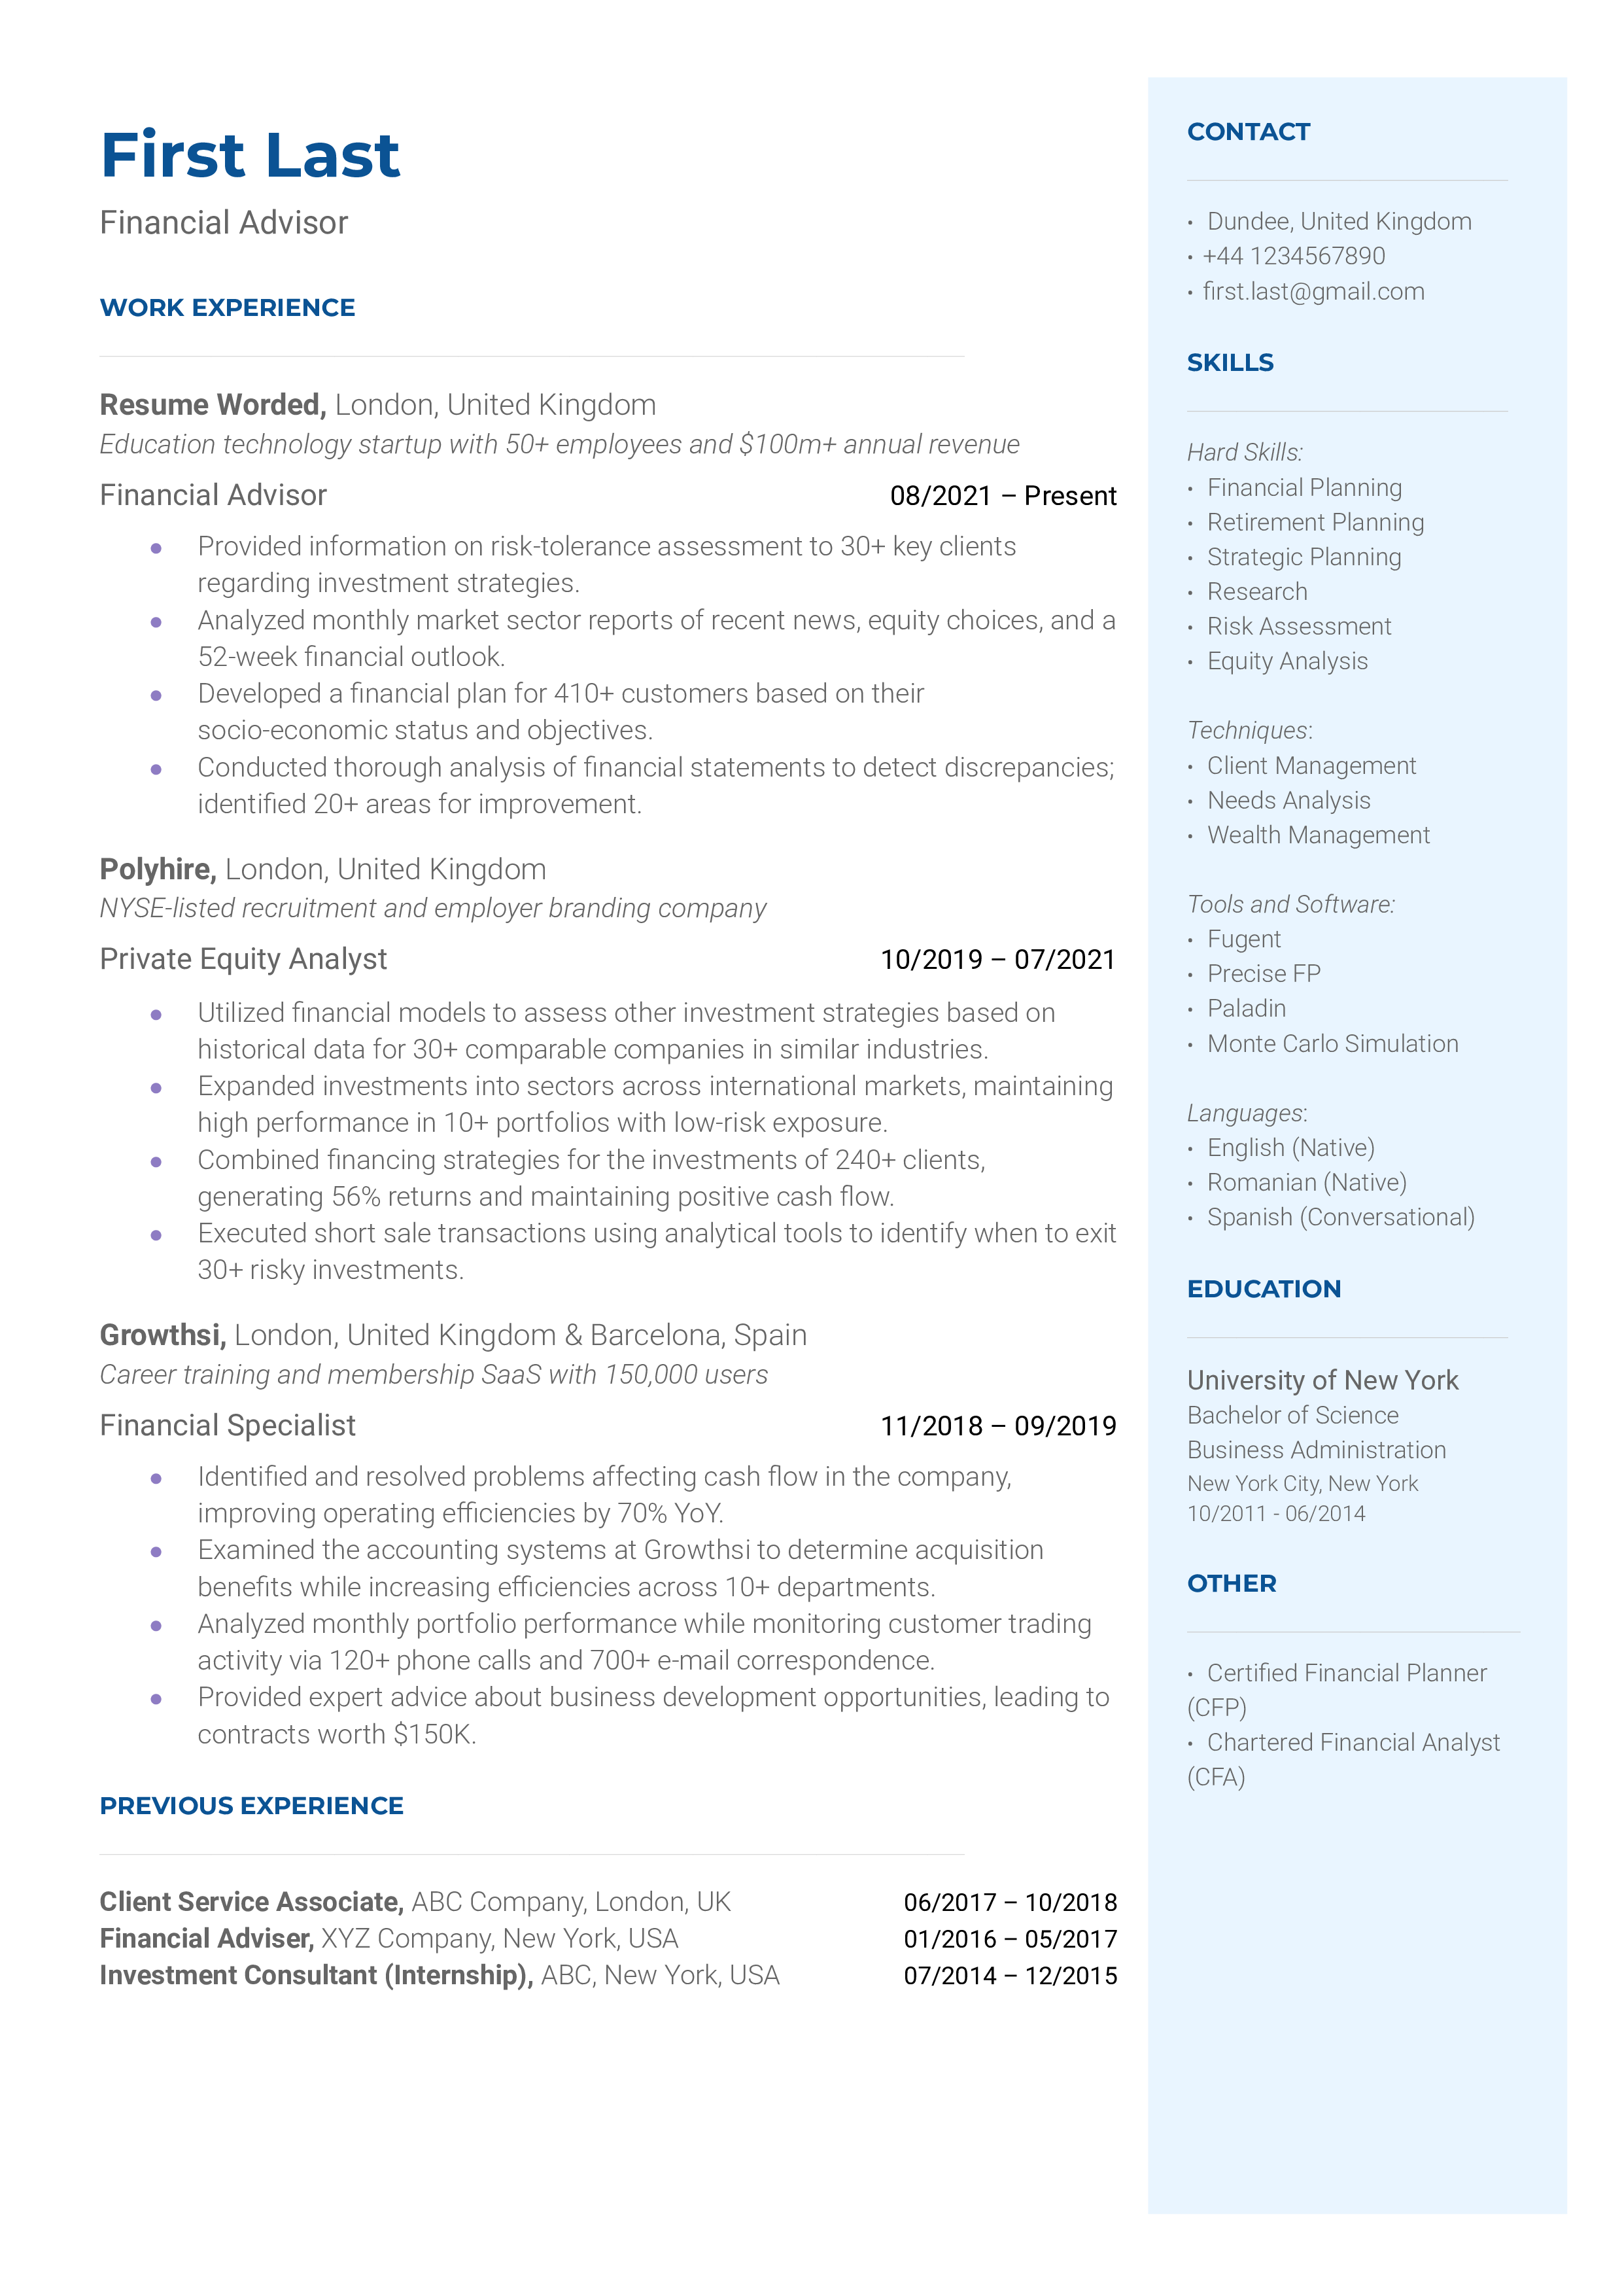 Financial advisor resume with certifications and interpersonal skills highlighted.